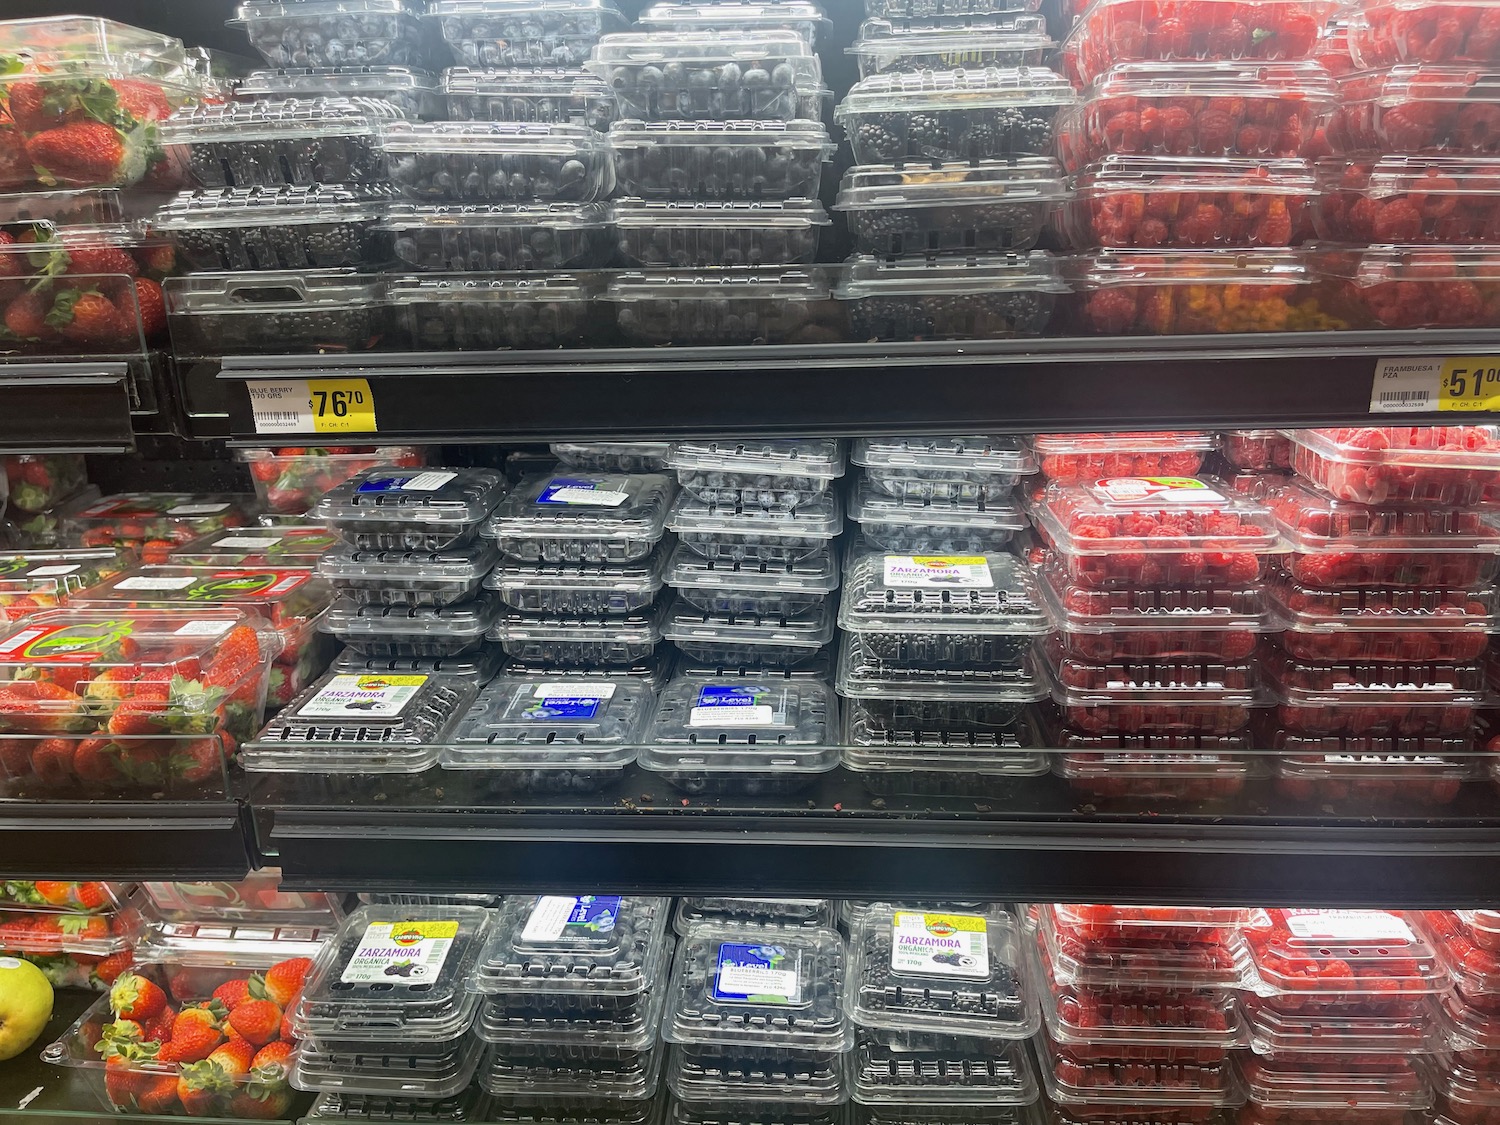 plastic containers of berries on a shelf